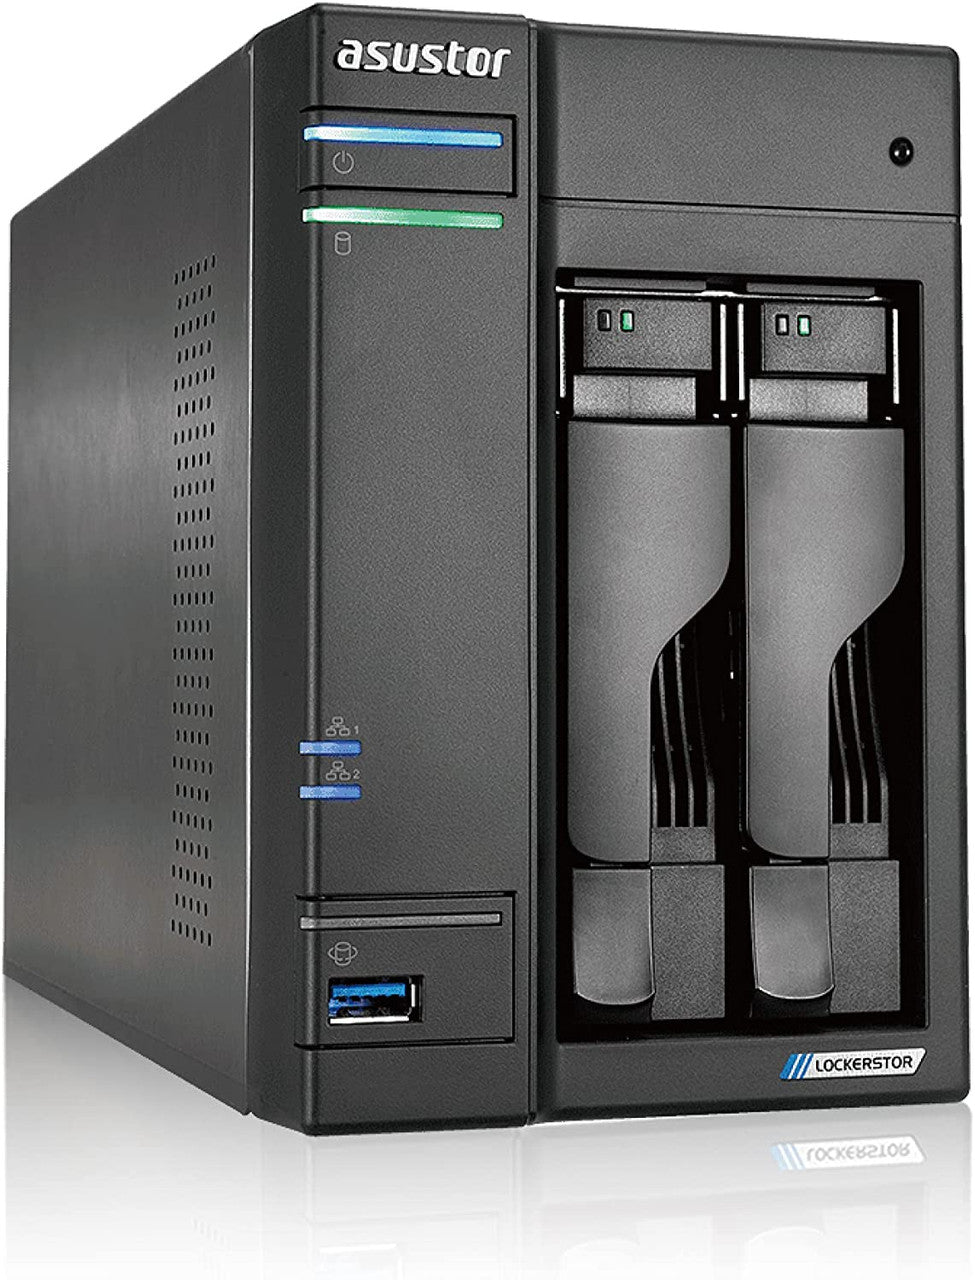 Asustor AS6602T 2-Bay Lockerstor 2 NAS with 8GB RAM and 24TB (2x12TB) Seagate Ironwolf PRO Drives